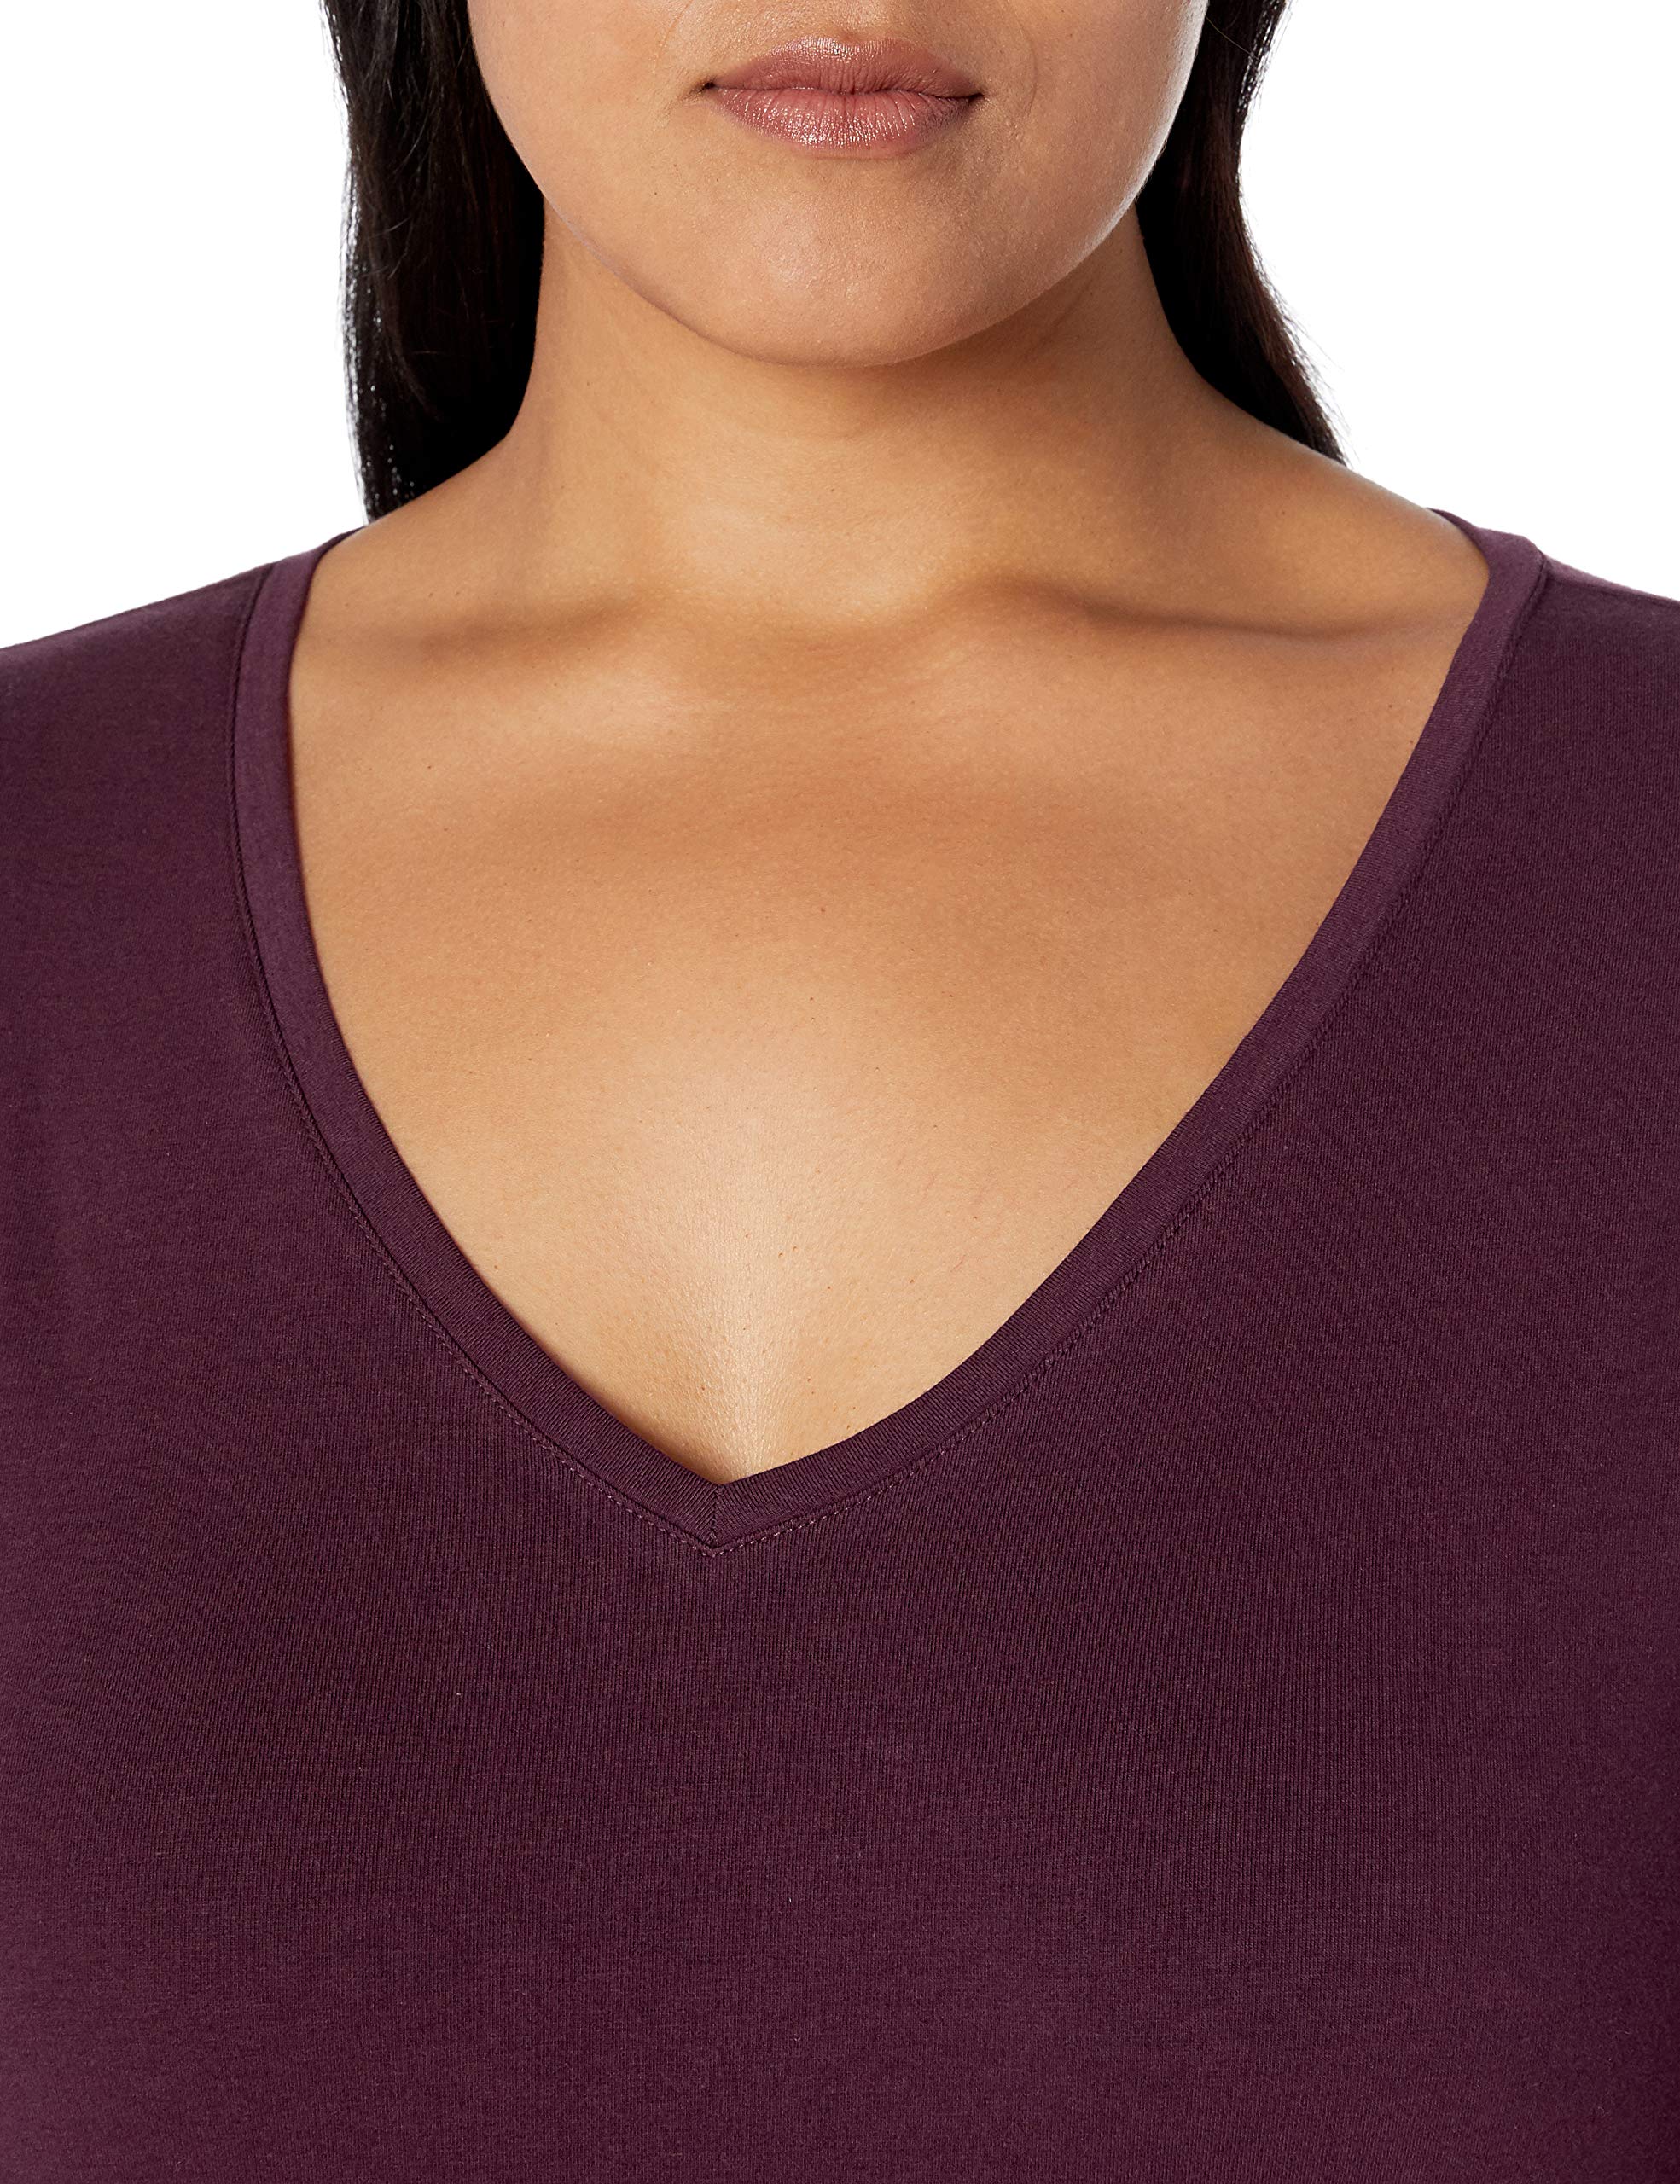 Amazon Essentials Women's Short-Sleeve V-Neck T-Shirt (Available in Plus Size)